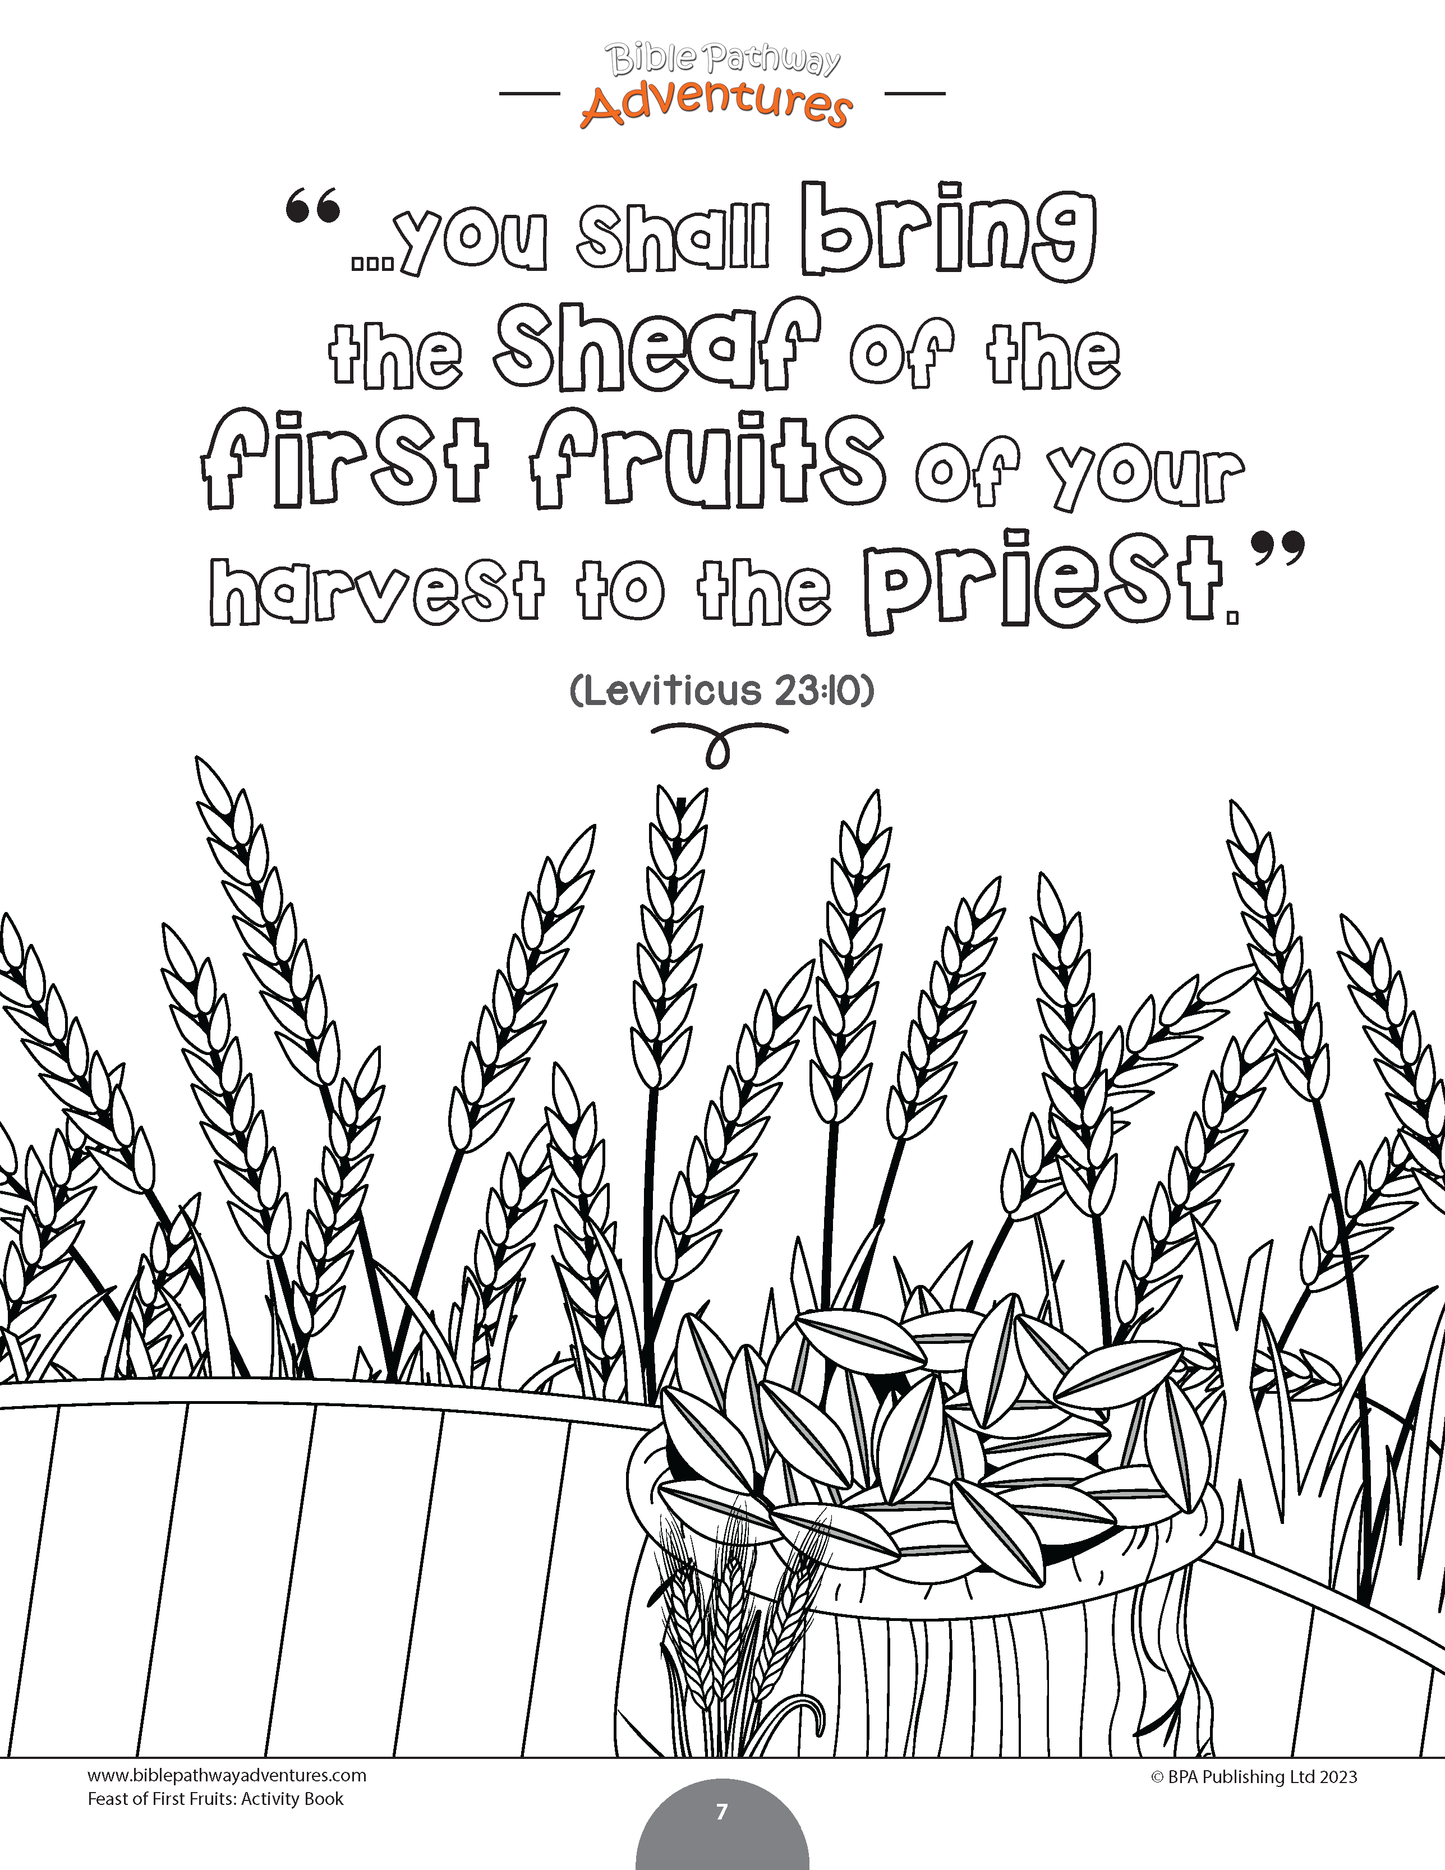 Feast of First Fruits Activity Book (PDF)